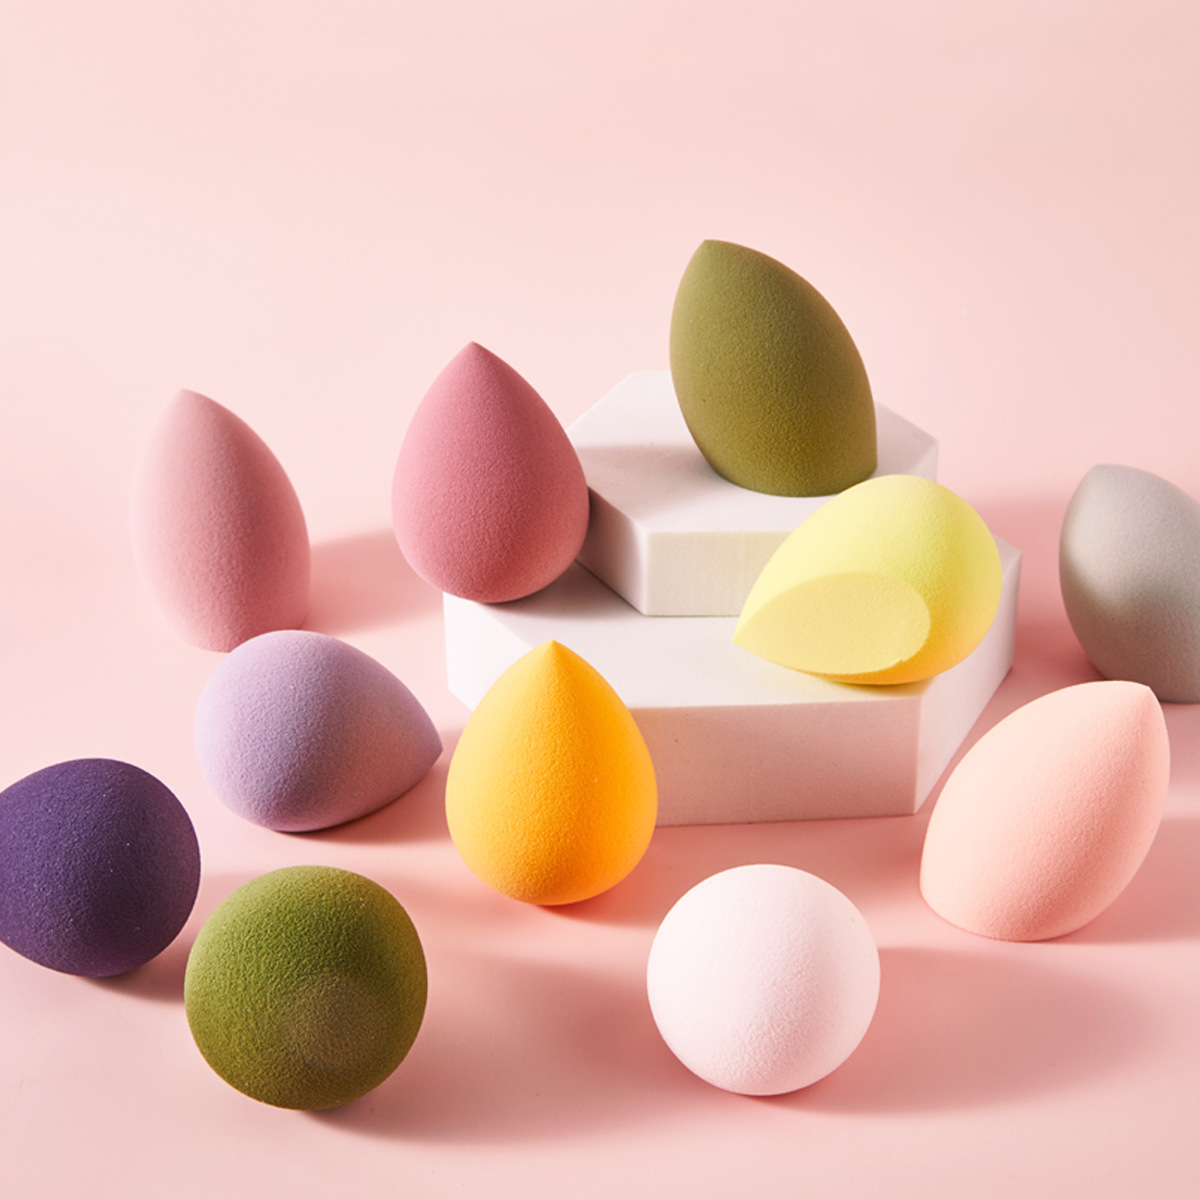 Egg Storage Box Cosmetic Egg Makeup Puff Beauty Blender Wet and Dry Dual-Use Super Soft Smear-Proof Cosmetic Egg Set Box 4 Pack